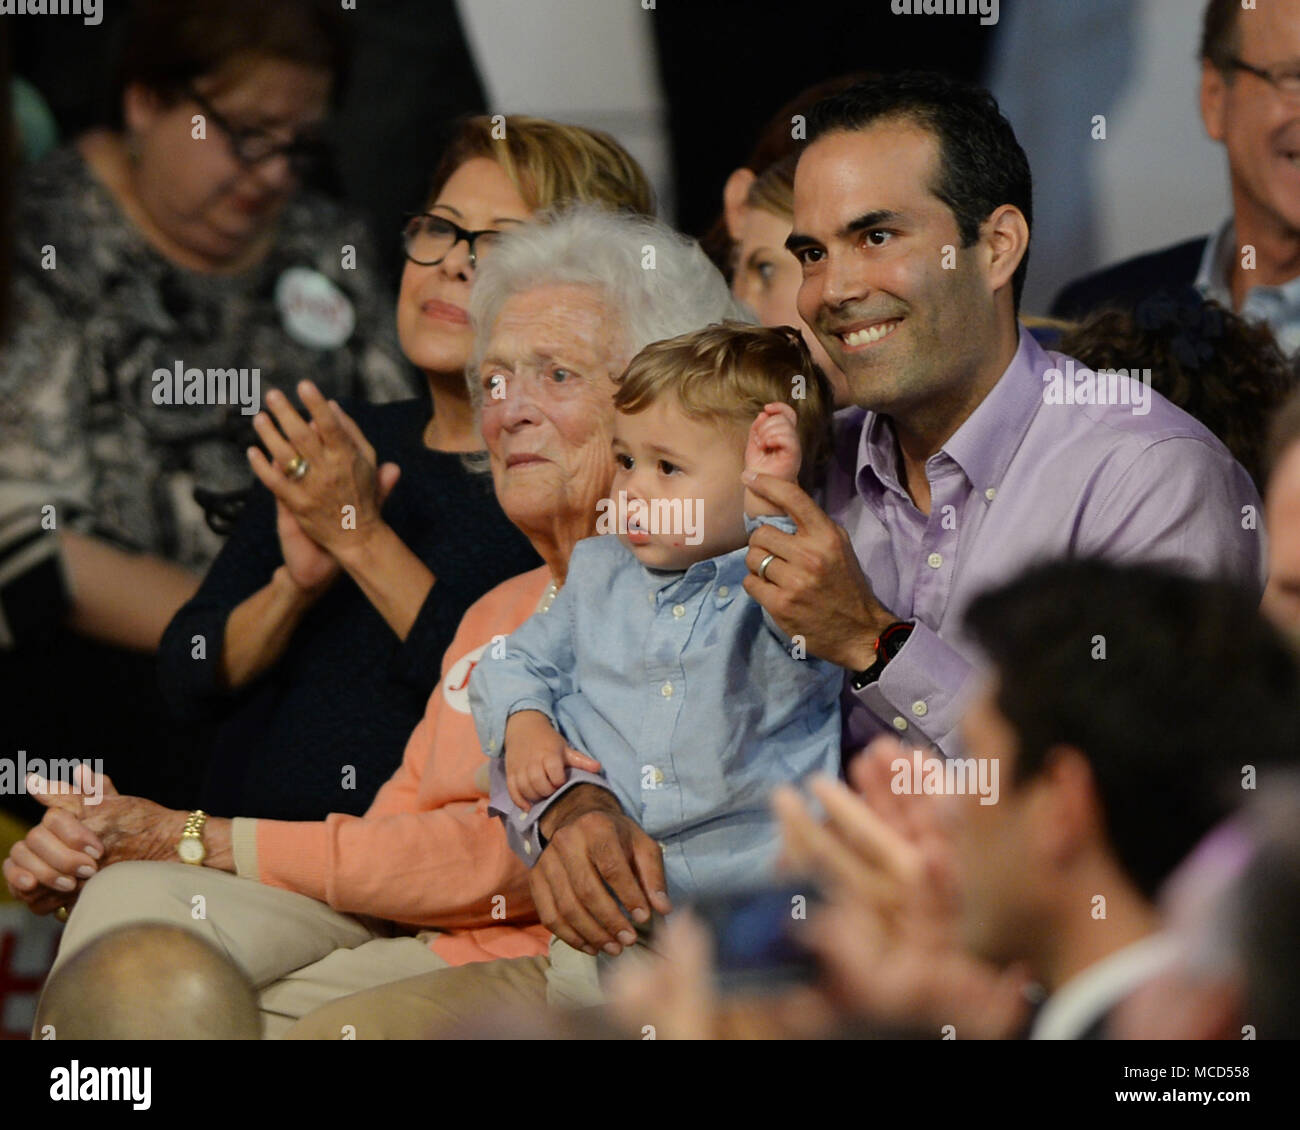 Miami, FL, USA. 15th June, 2018. Columba Bush, Barbara Bush and George P. Bush as Former Florida Governor Jeb Bush announces his candidacy for the 2016 Republican Presidential nomination during a rally at Miami Dade College on June 15, 2015 in Miami, Florida. Credit: Mpi04/Media Punch/Alamy Live News Stock Photo